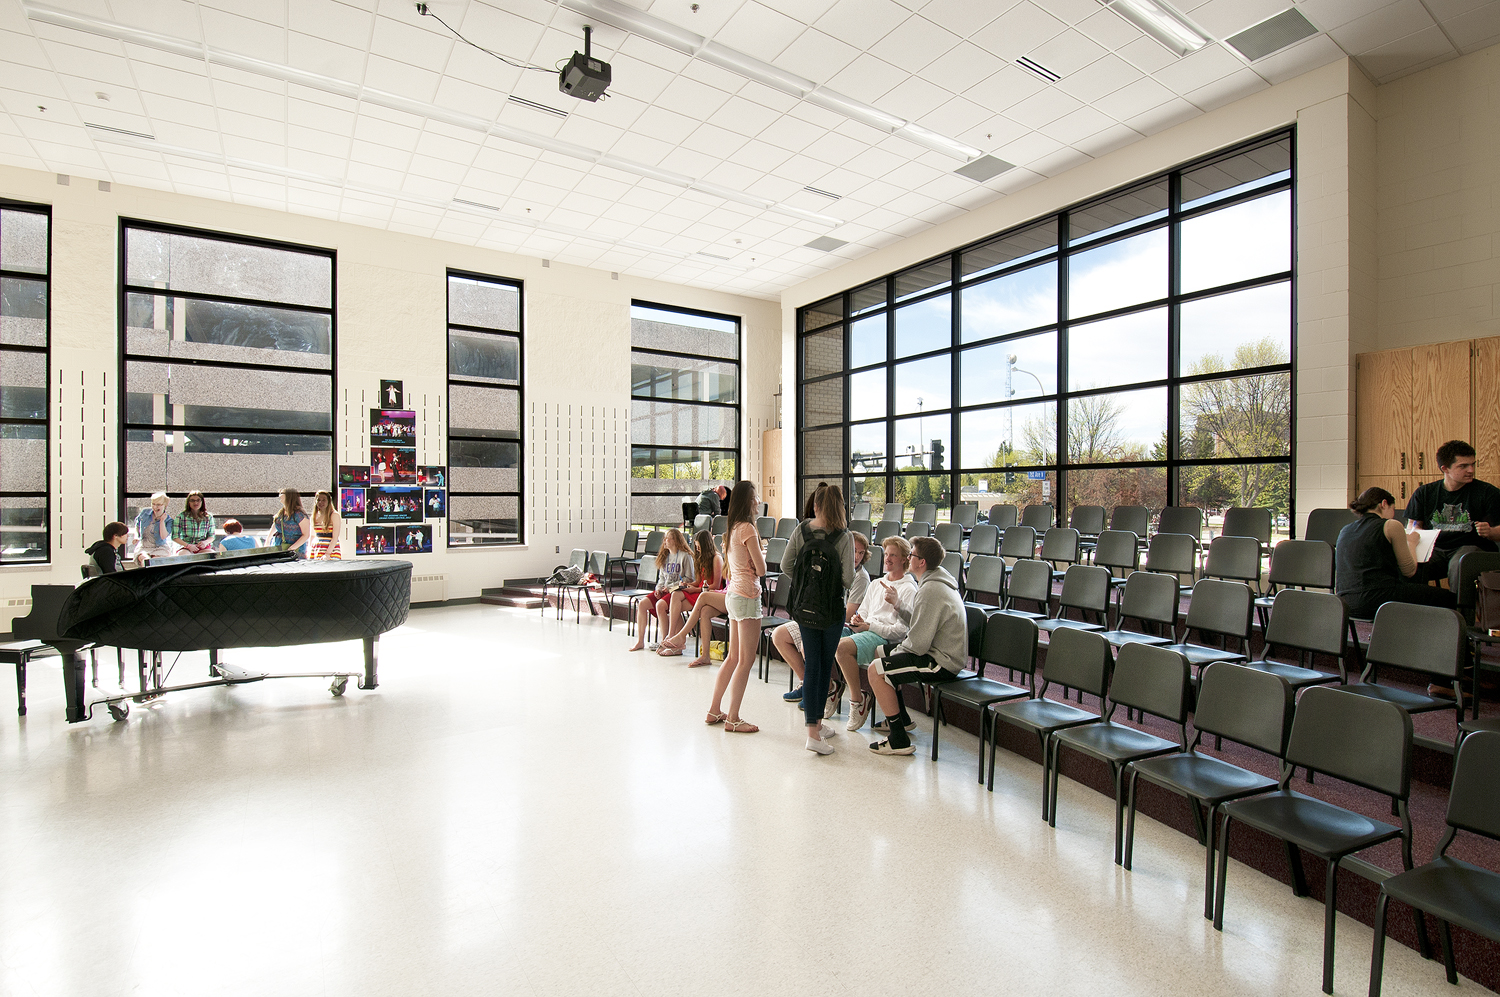 grand forks central high school theater arts addition renovation-9